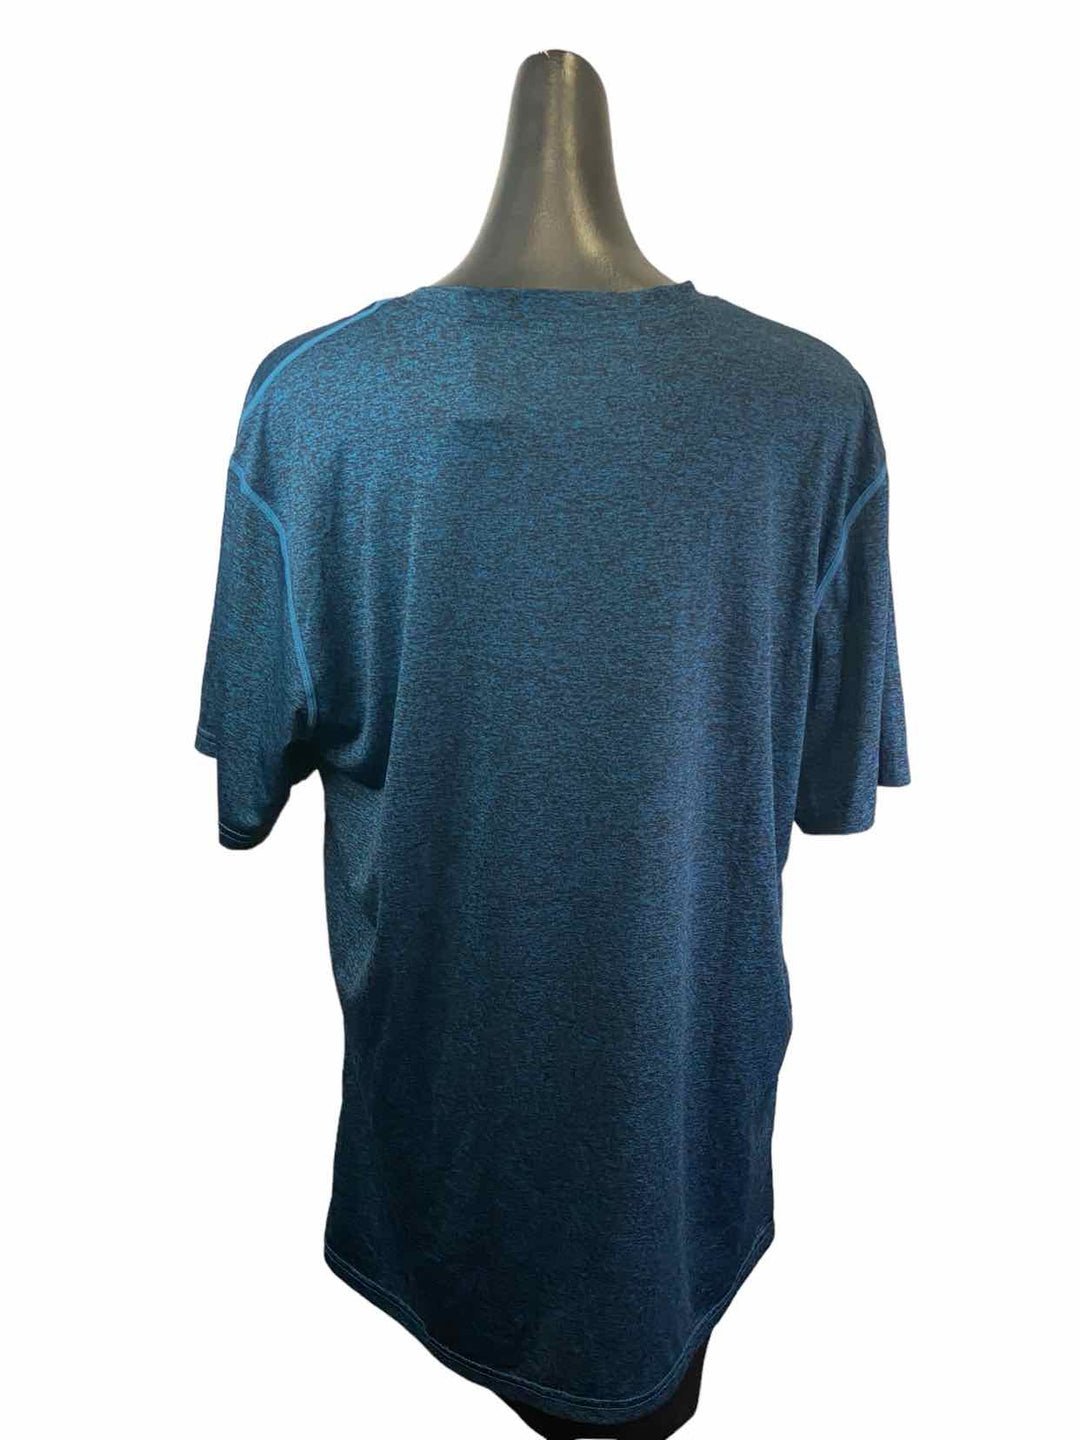 Unknown Brand Size XL Blue Black Athletic Short Sleeve